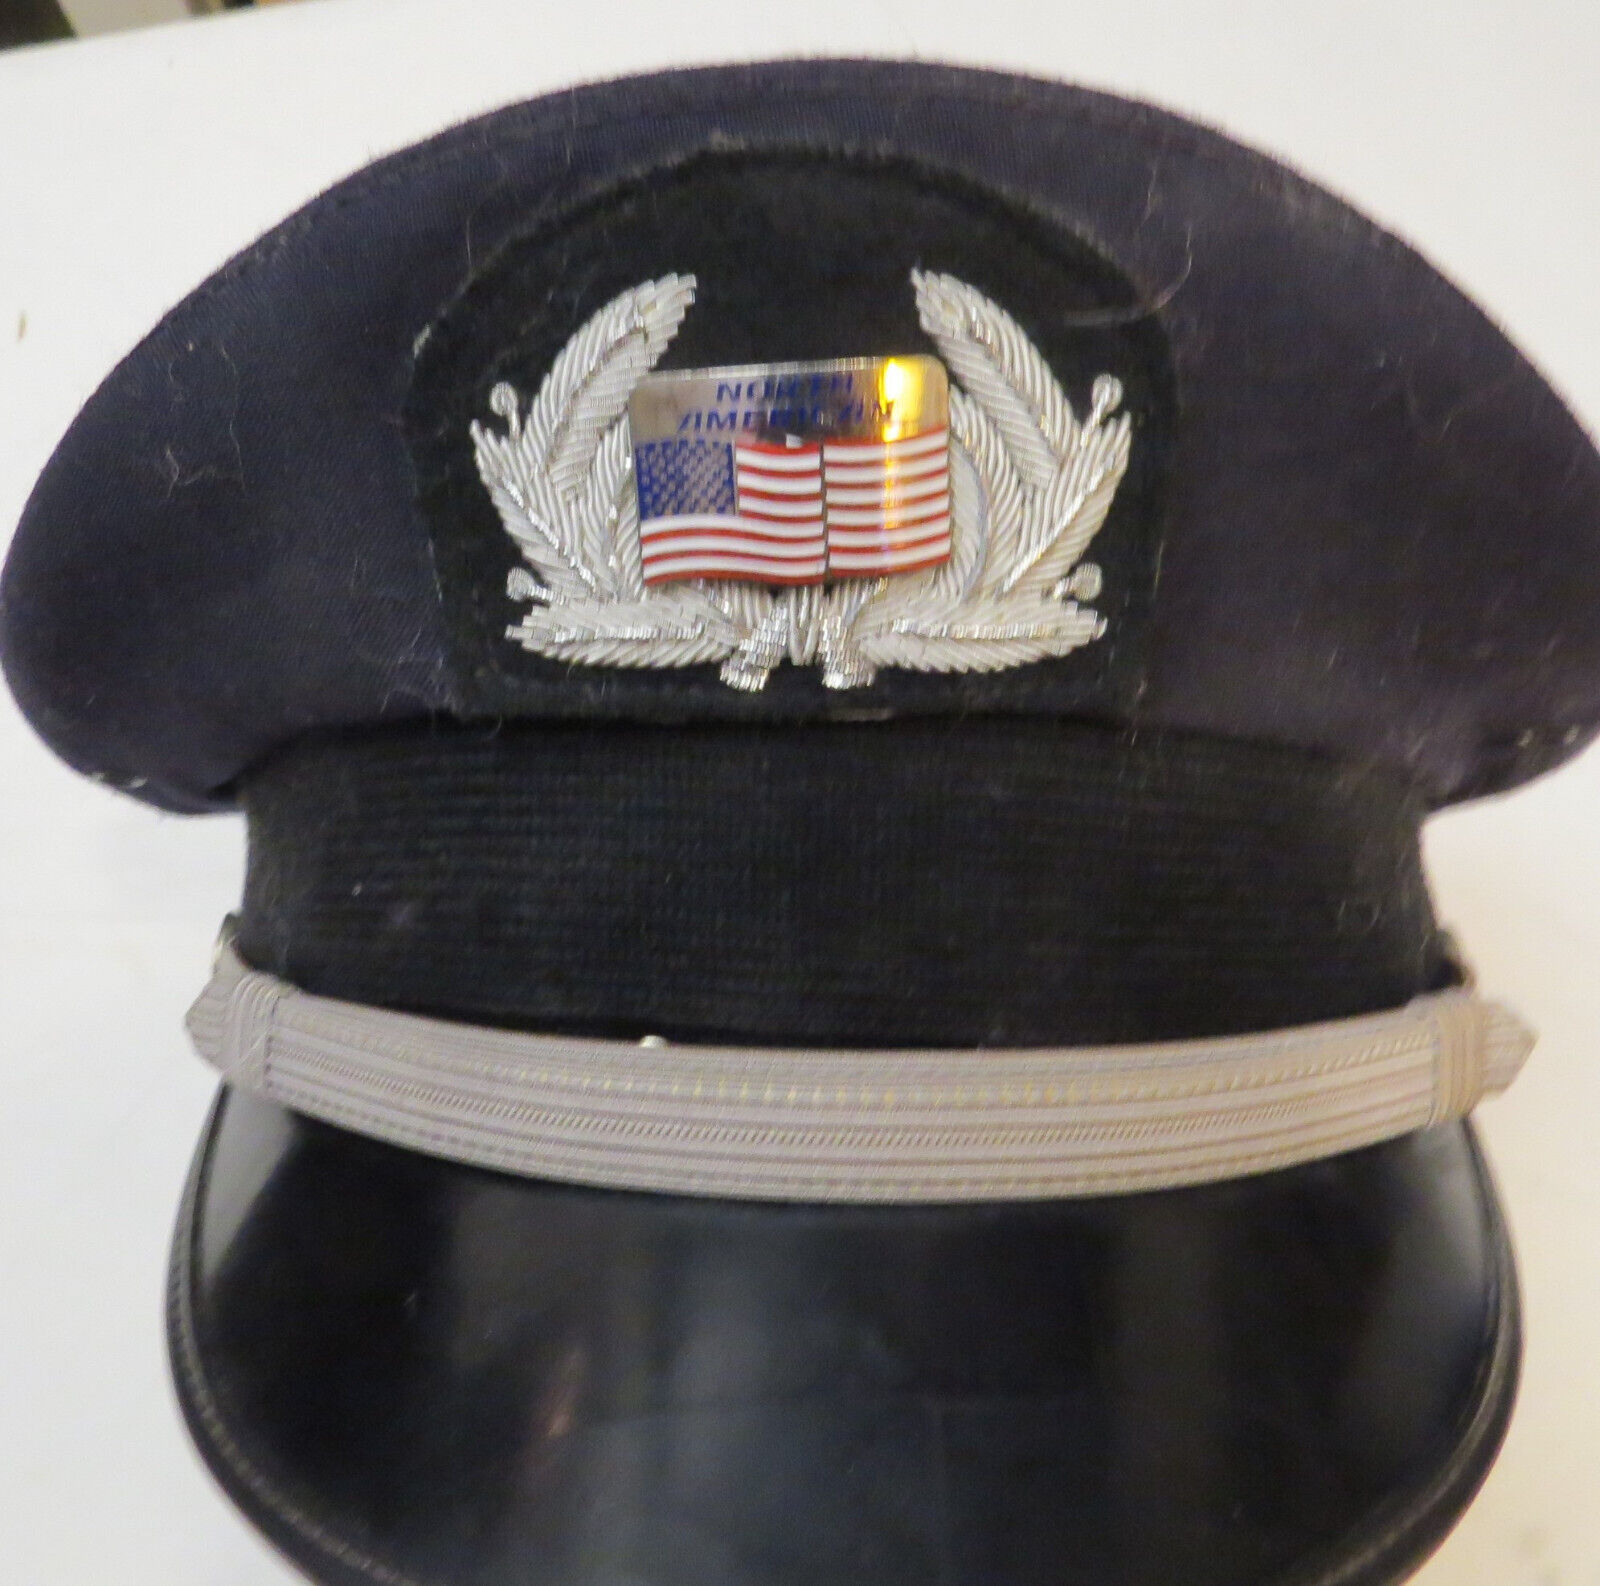 Vintage Military/Intelligce Charter North American Airlines Pilot Hat